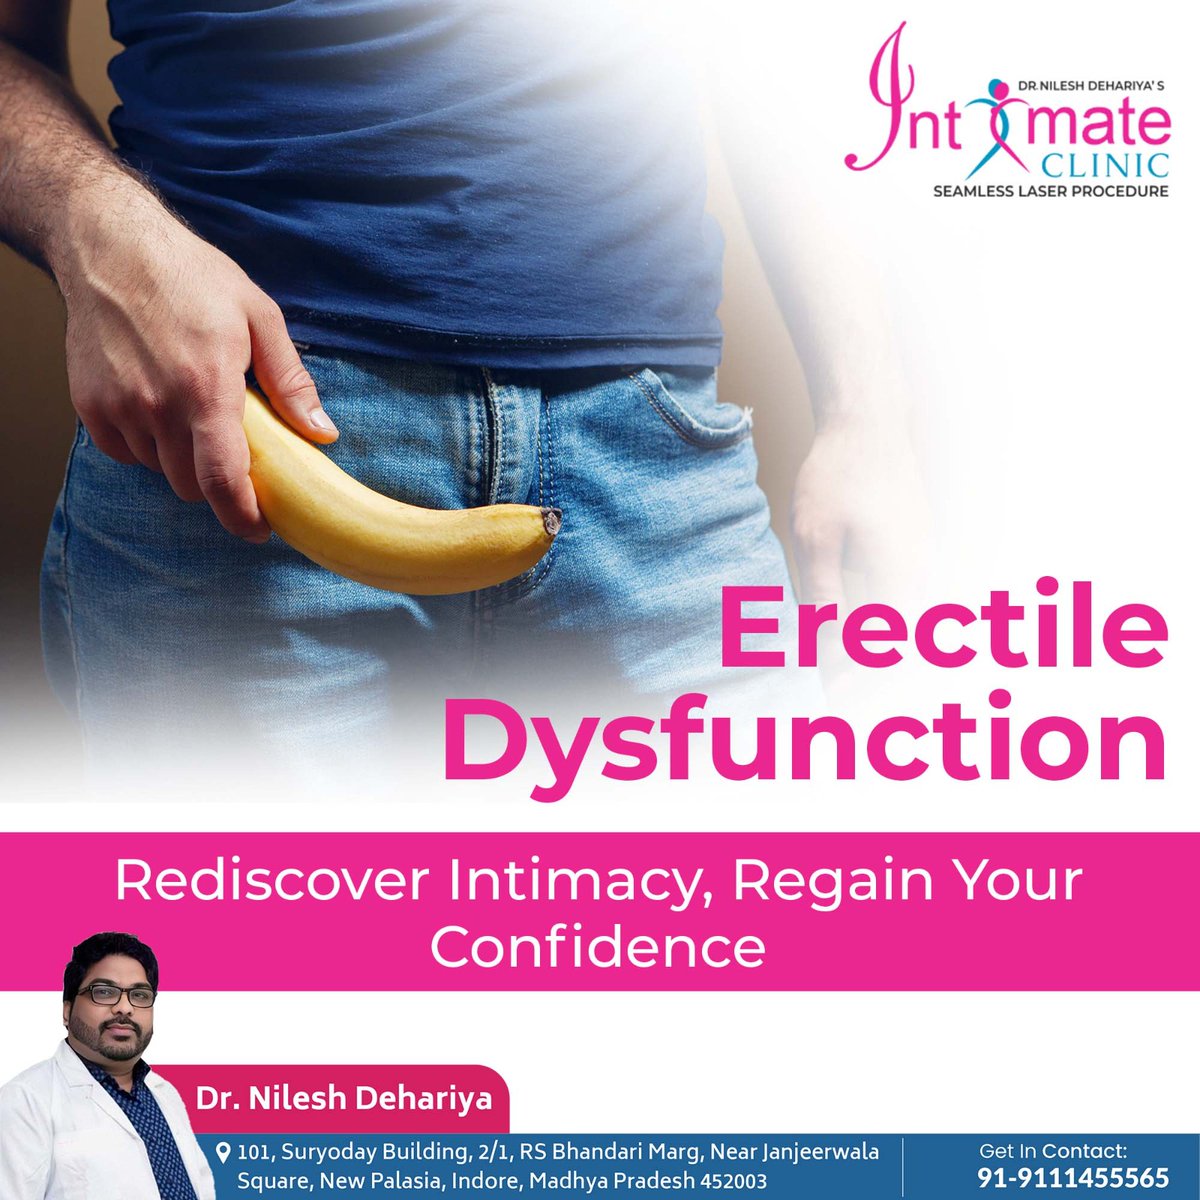 Erectile Dysfunction
Rediscover Intimacy, Regain Your Confidence
.
Visit:- intimateclinic.in/erectile-dysfu…
.
#erectiledysfunction #ed #impotence #malesexualhealth #menshealth #sexualwellness #edawareness #edtreatment #sexualdysfunction #edrecovery #healthysexlife #edsolutions